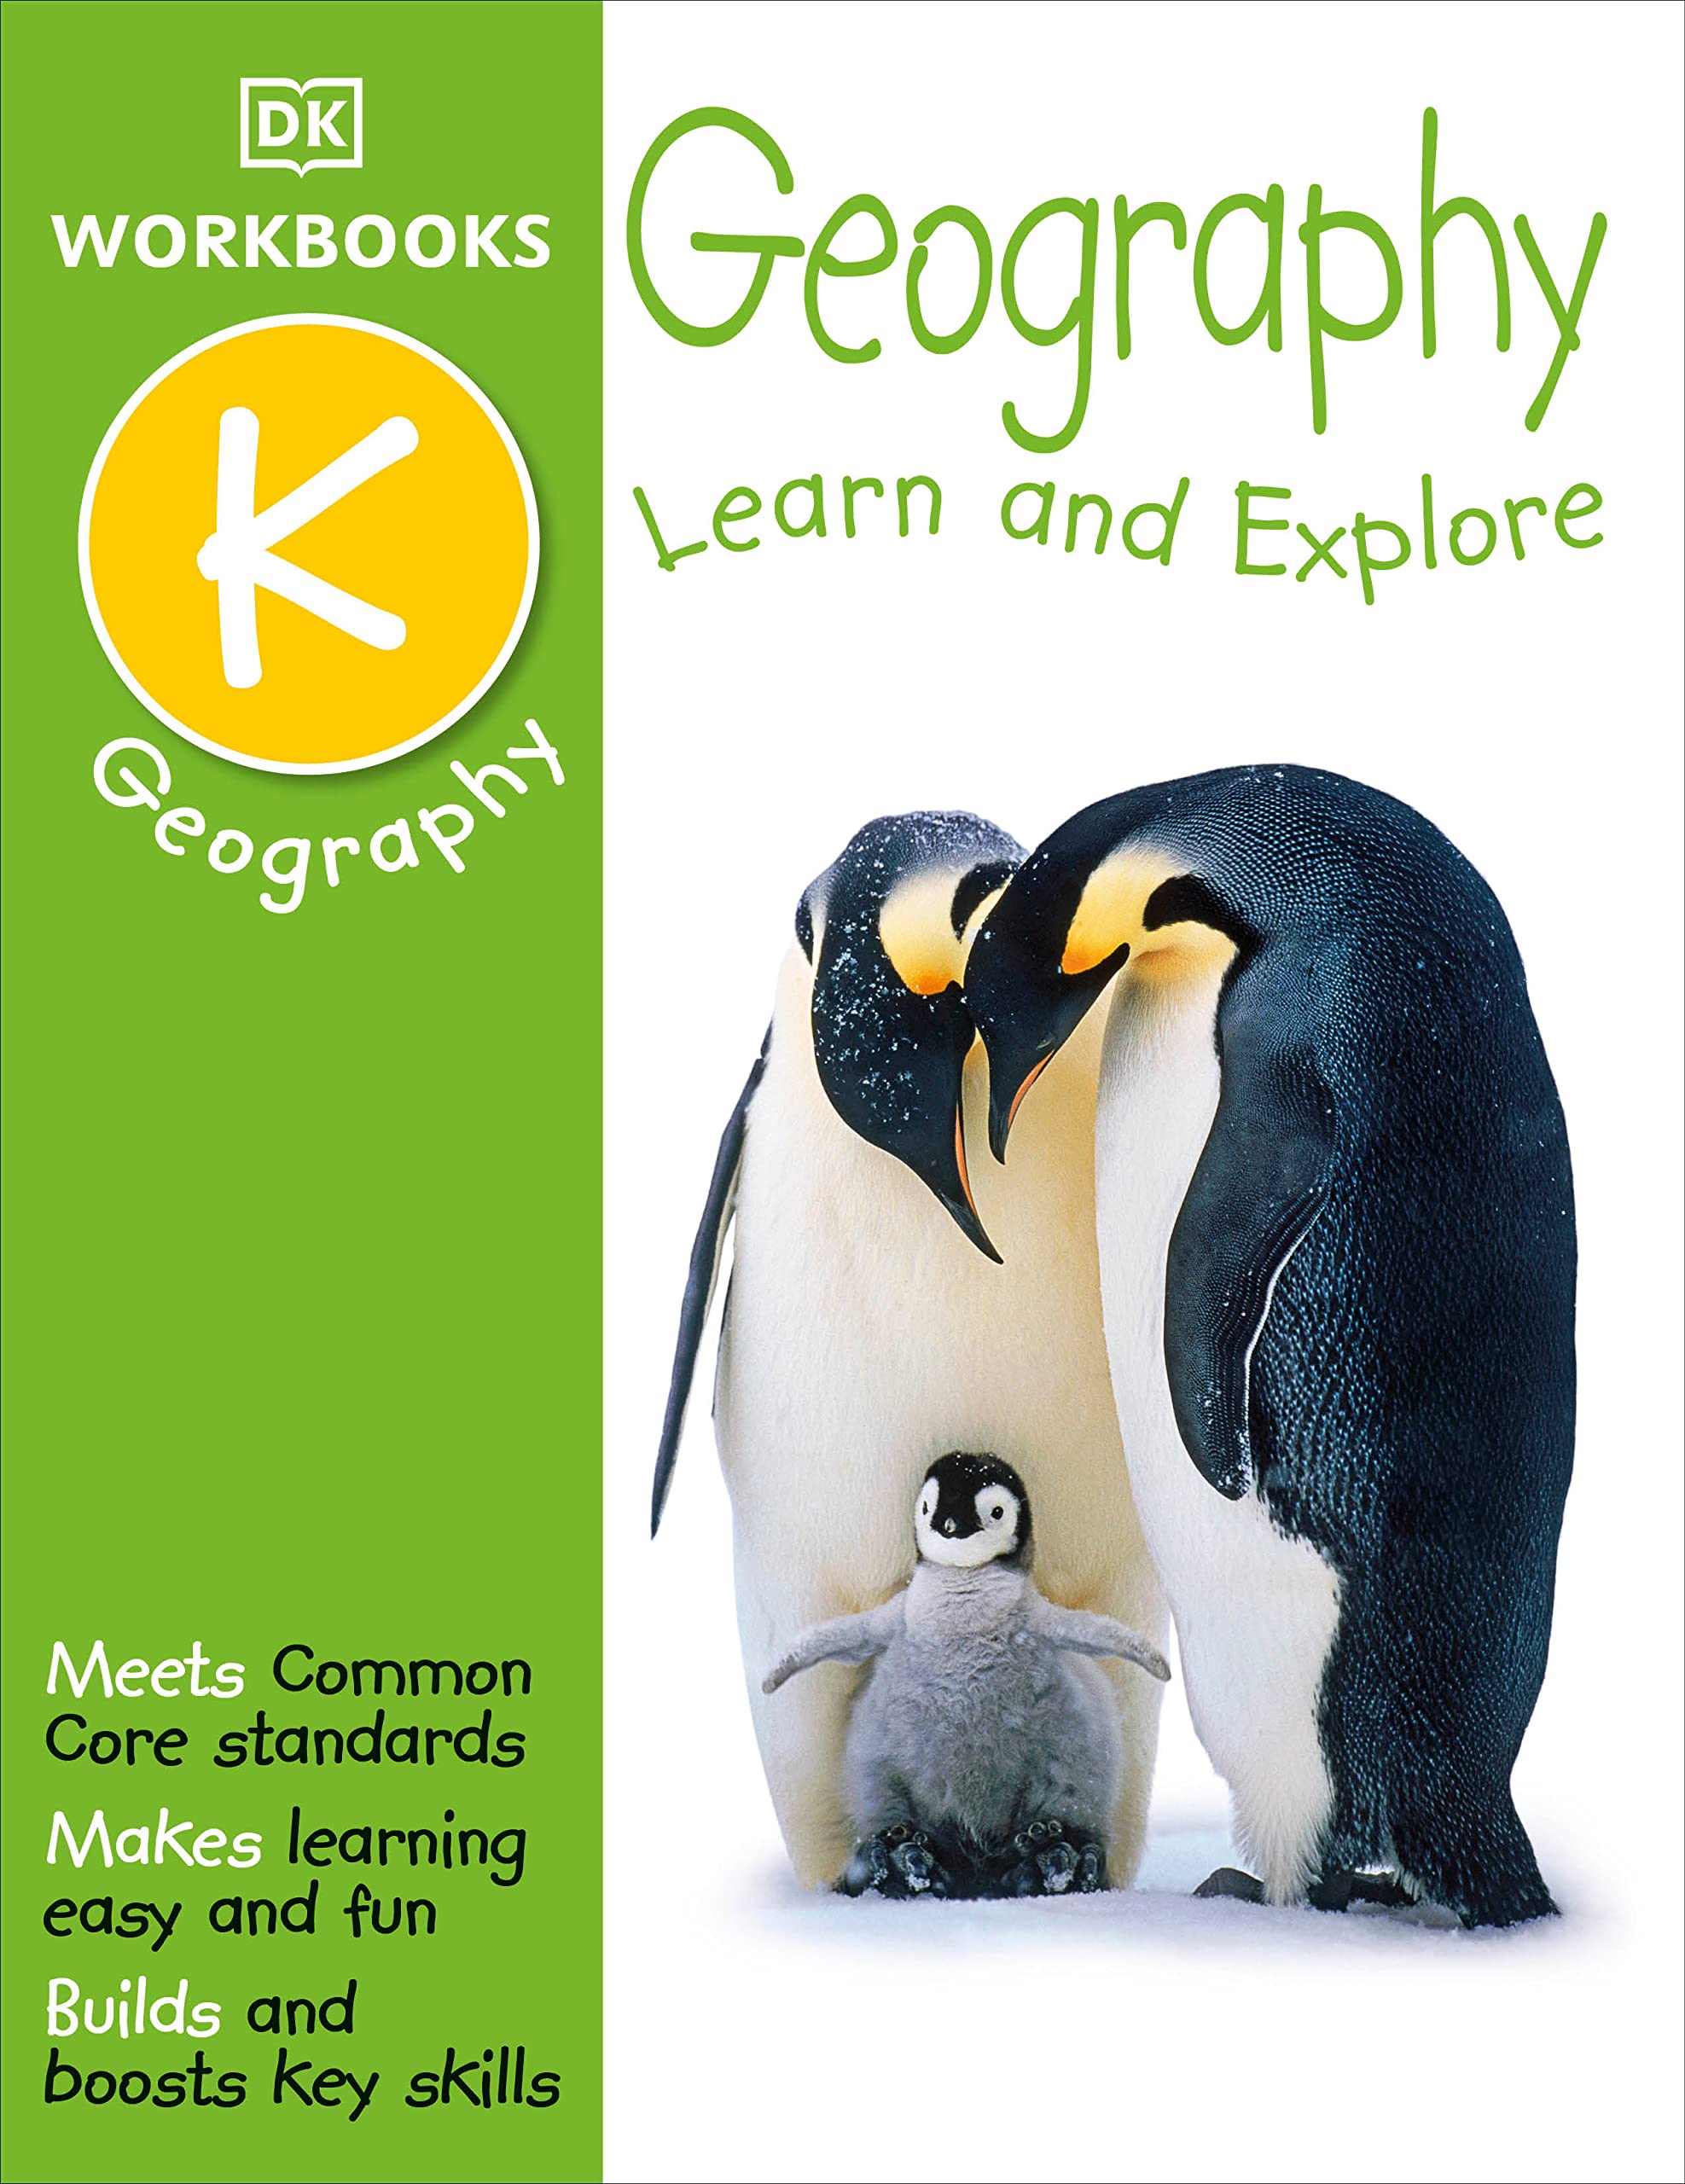 Book Cover DK Workbooks: Geography, Kindergarten: Learn and Explore